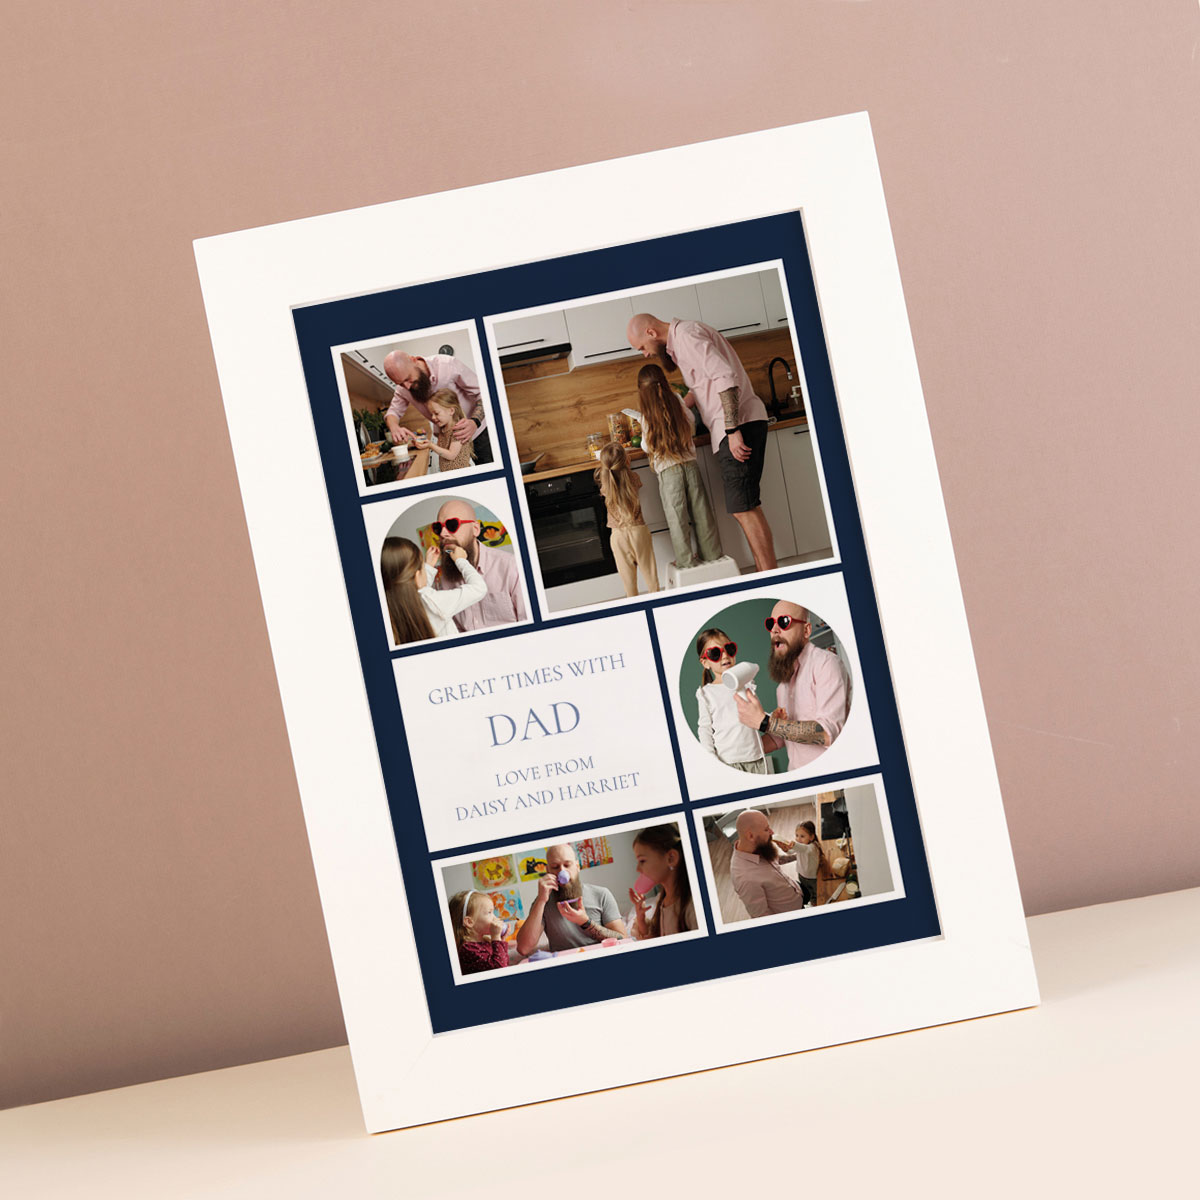 Personalised Father's Day Portrait Print - Great Times